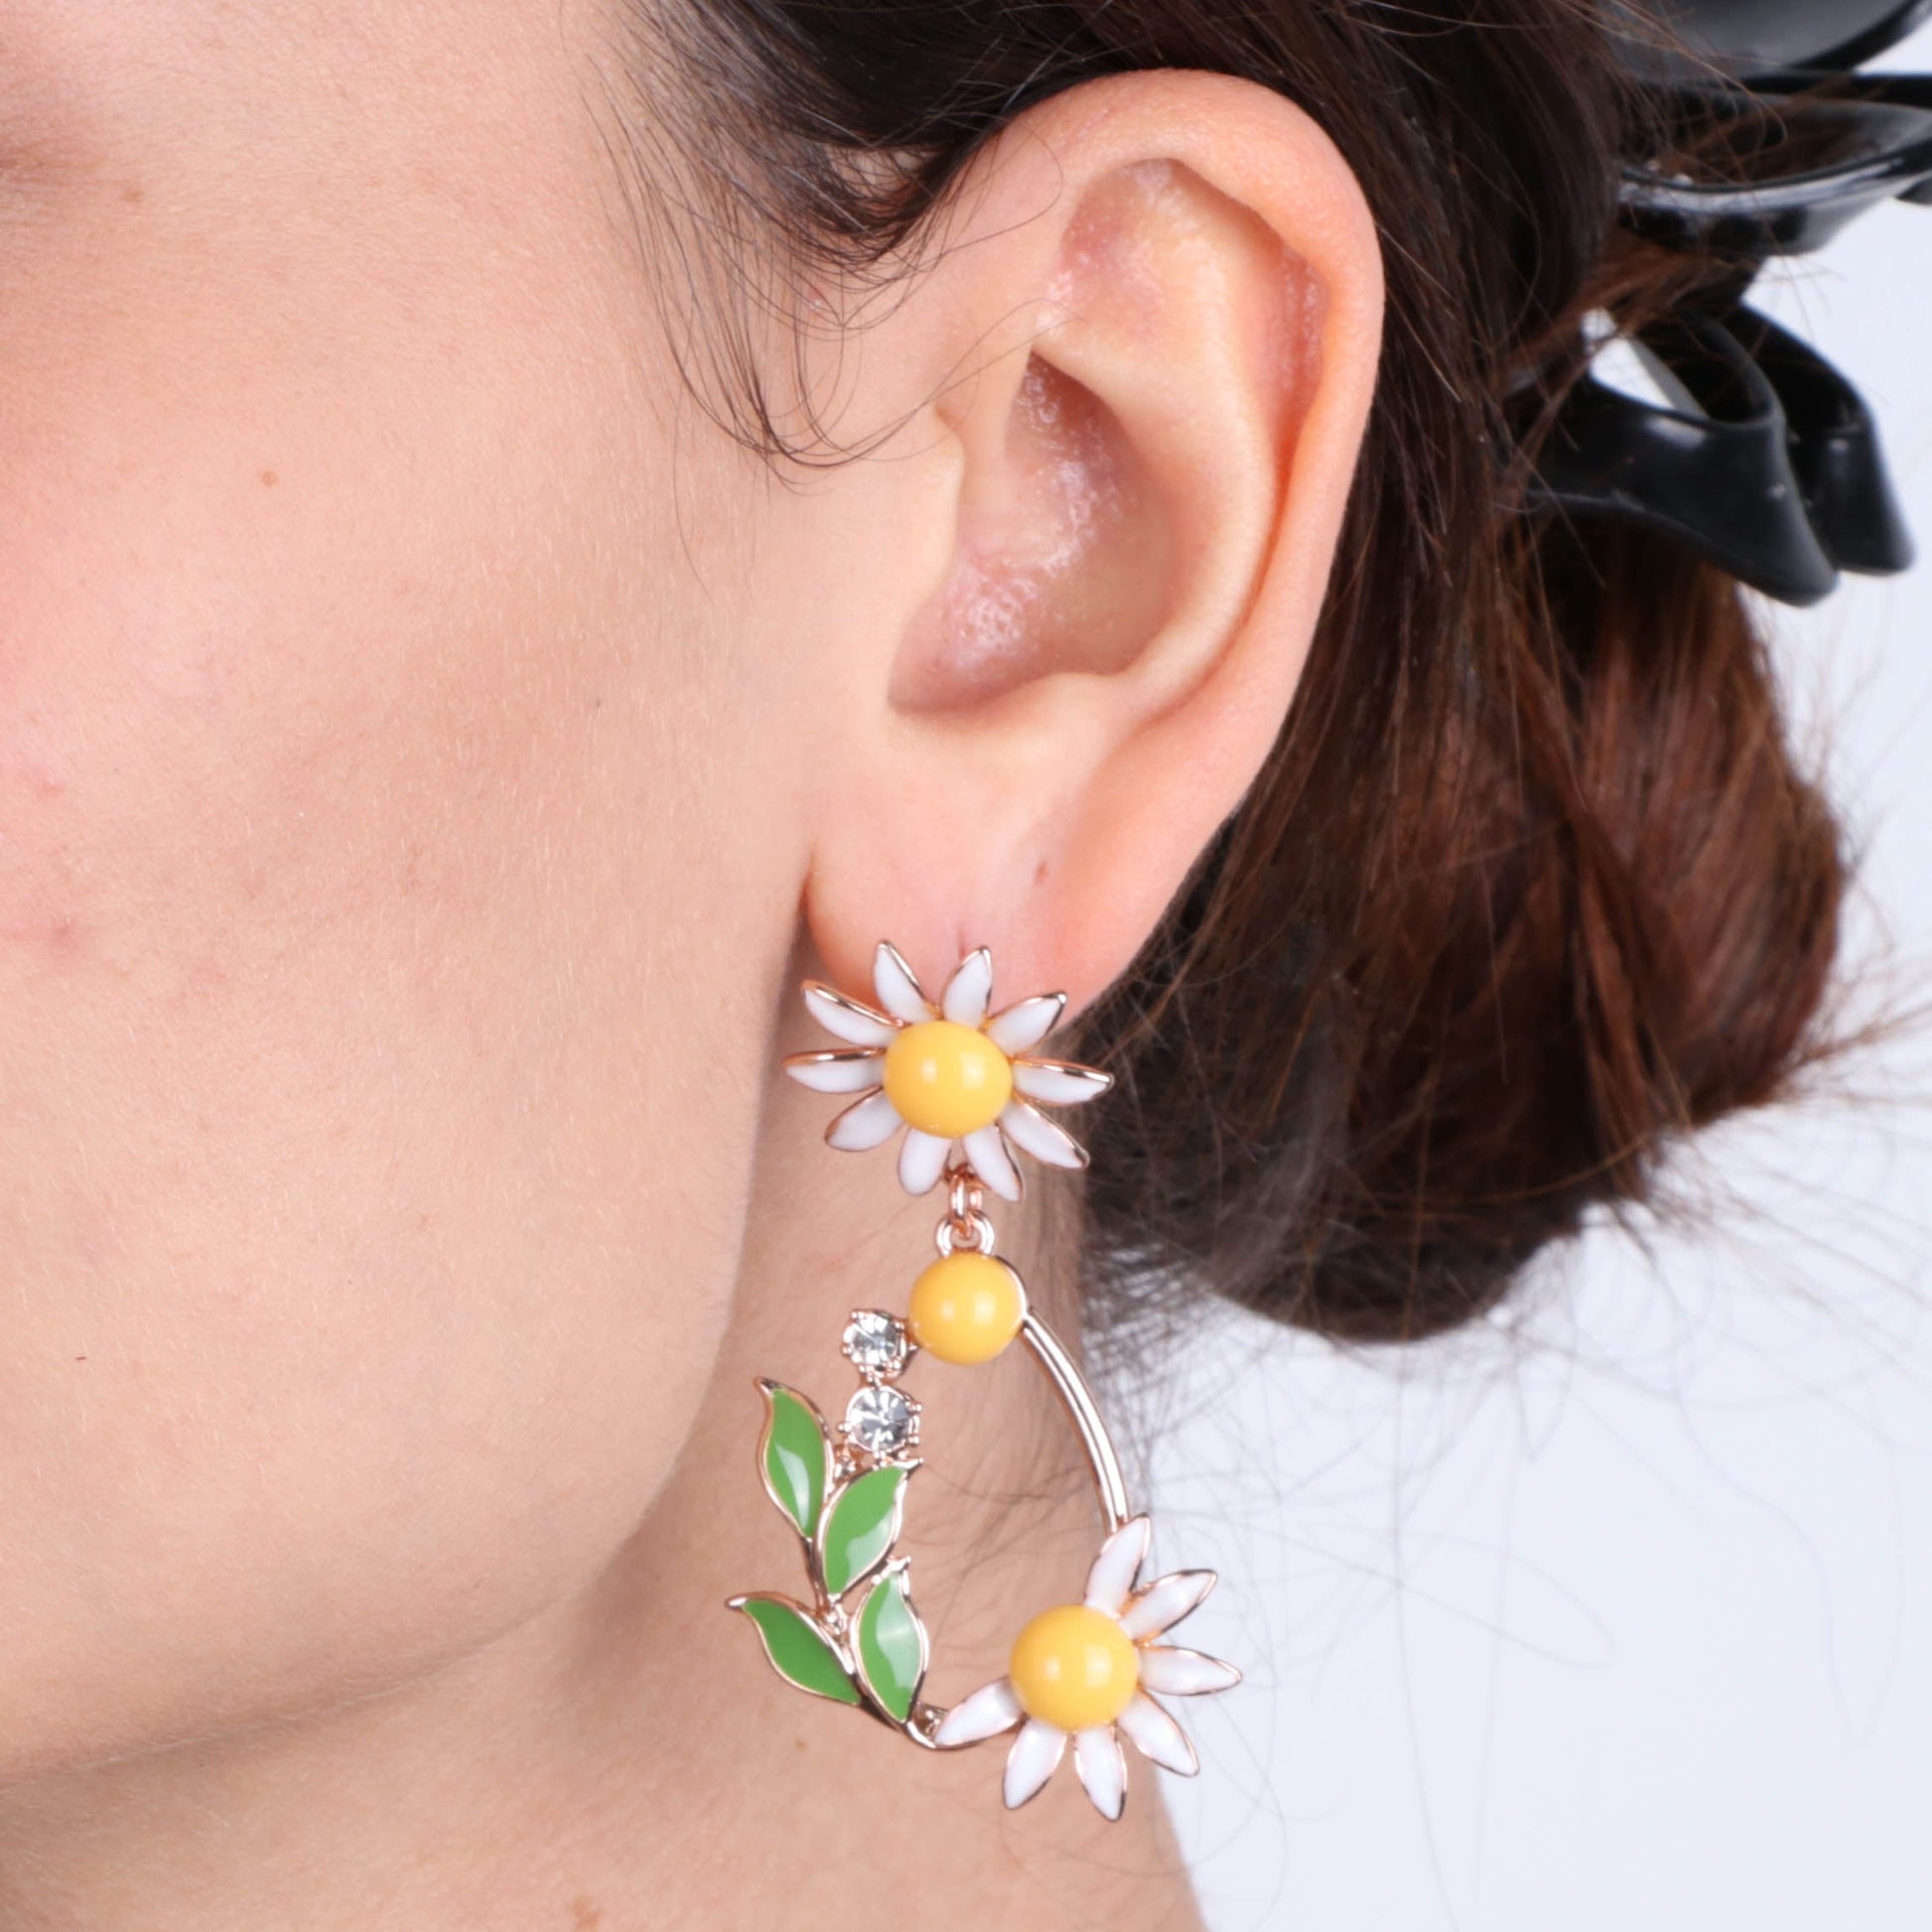 Metal earrings with pendant daisies embellished with colored enamels and Bianchj crystals